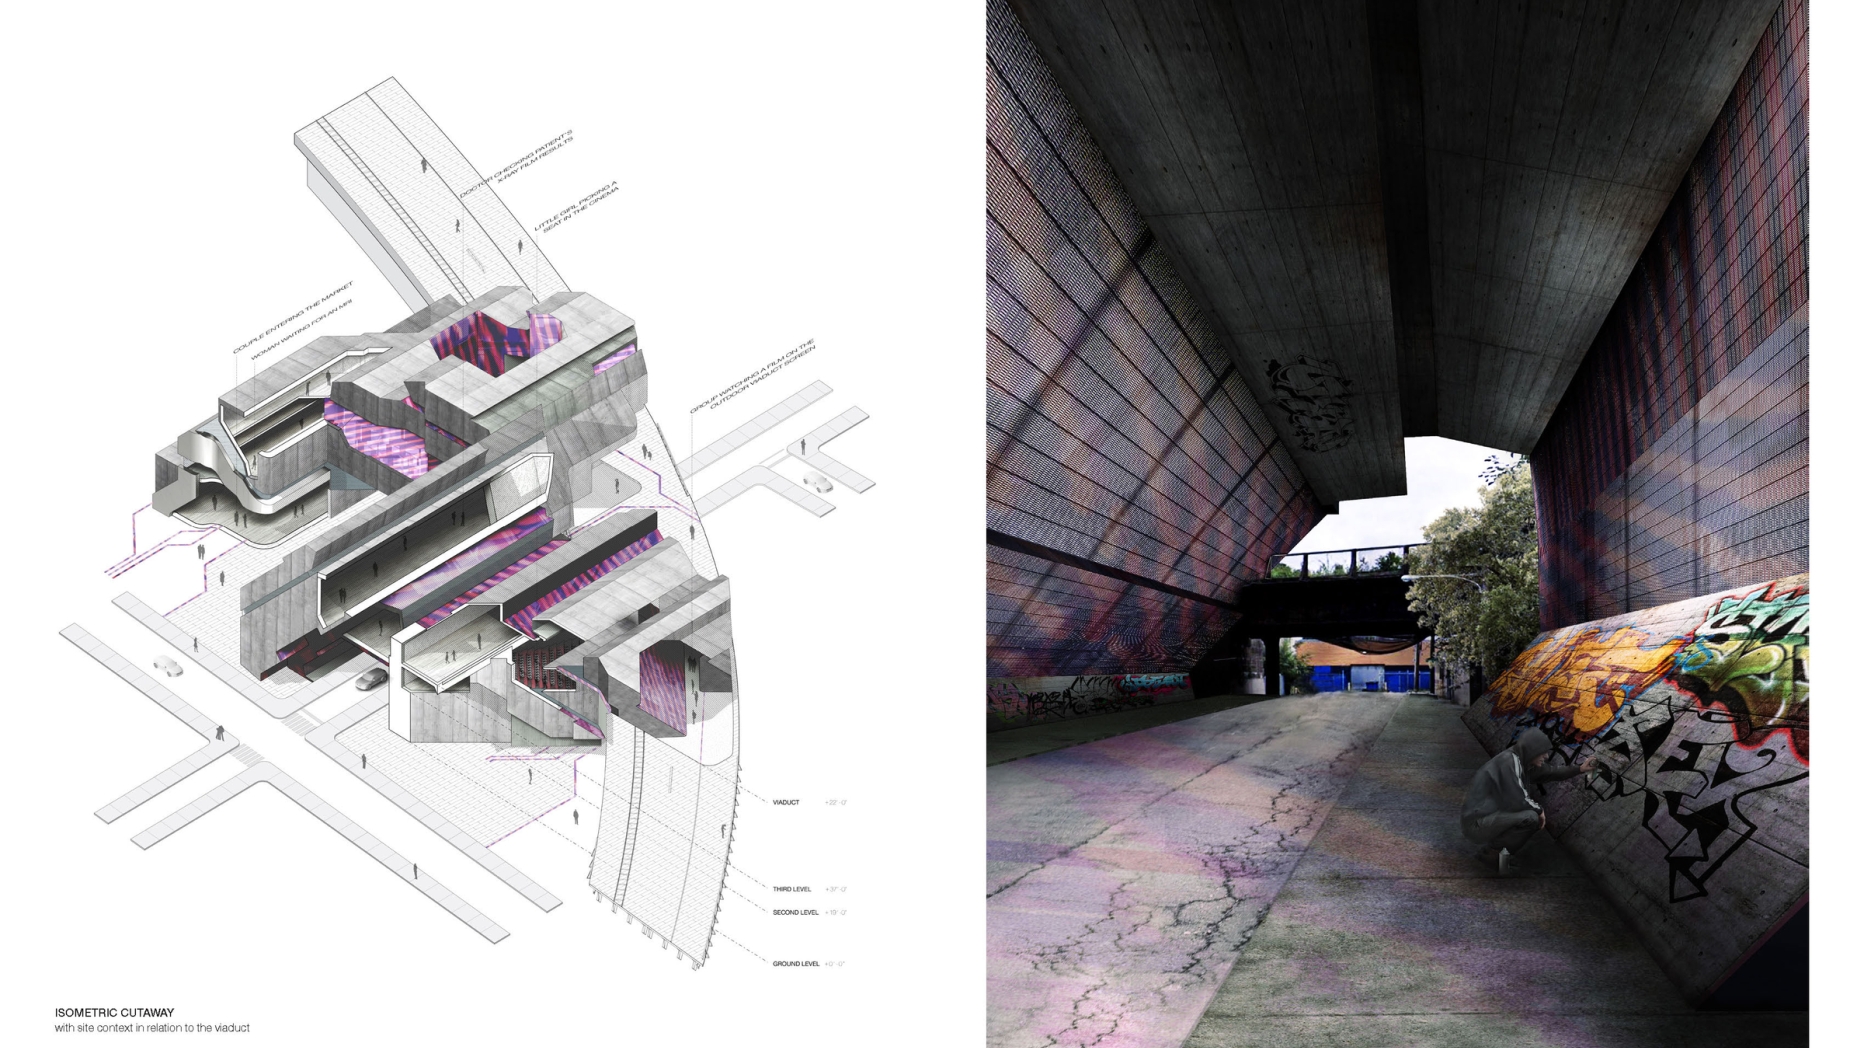 Isometric cutaway of building designed around a viaduct and rendering of a man grafittiing a wall